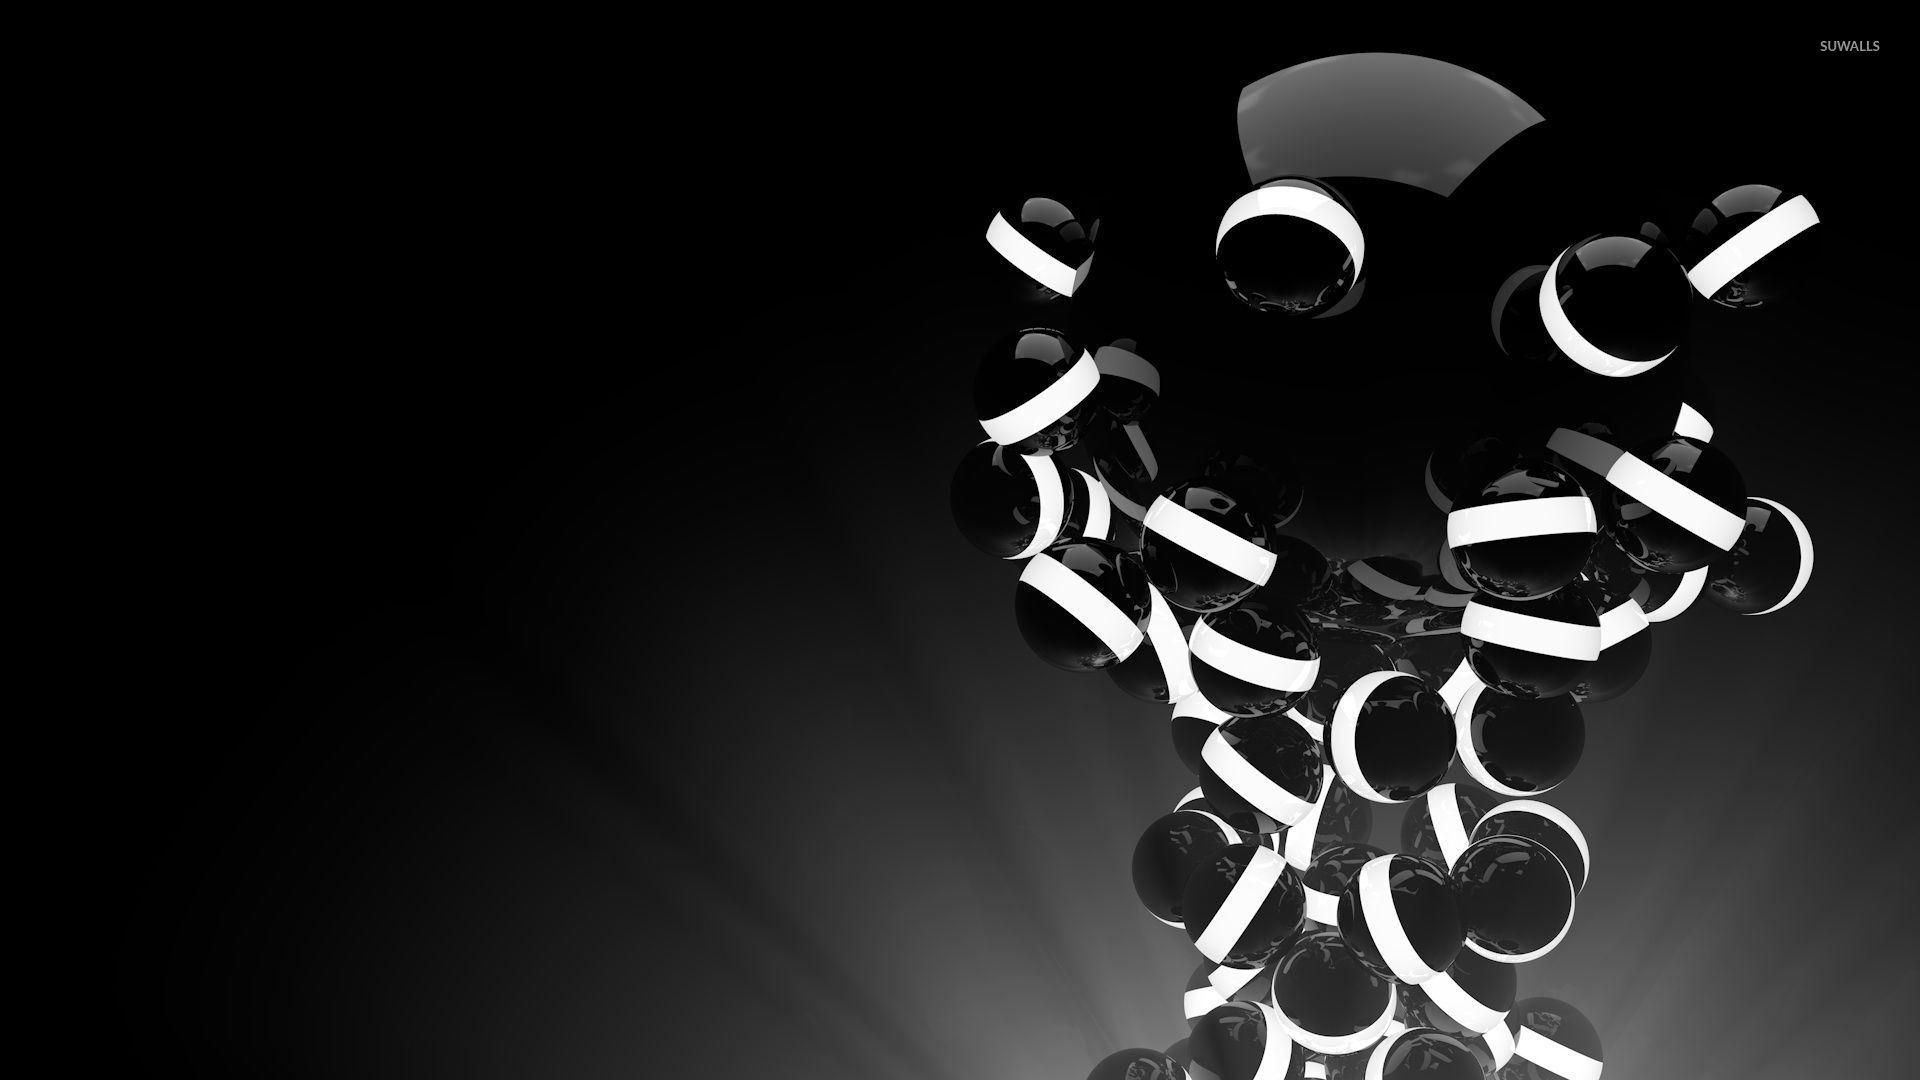 Black And White Orbs Falling Into The Light Wallpaper 3D